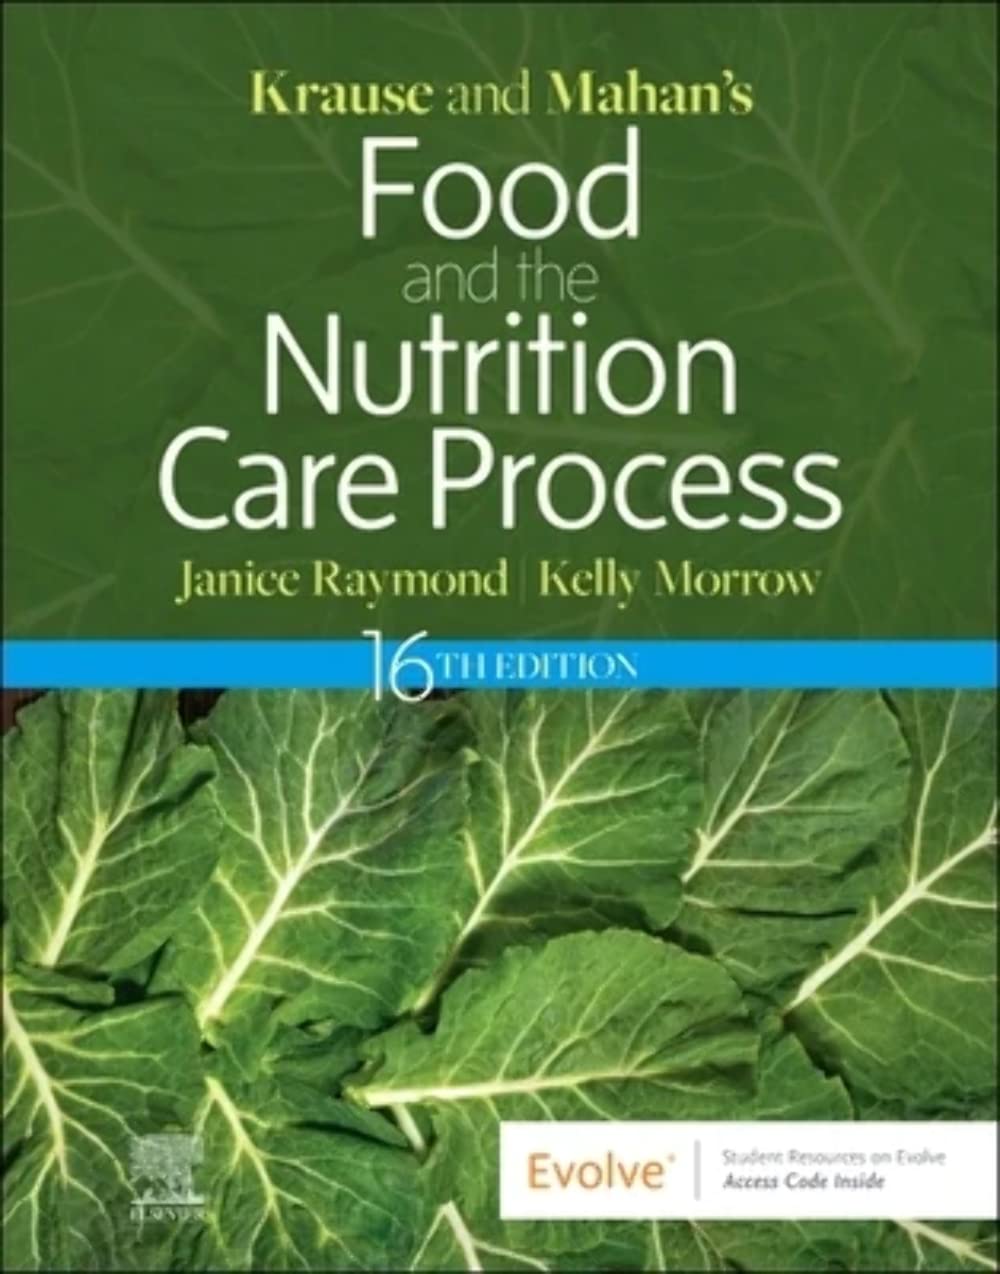 Krause and Mahan’s Food and the Nutrition Care Process-16판